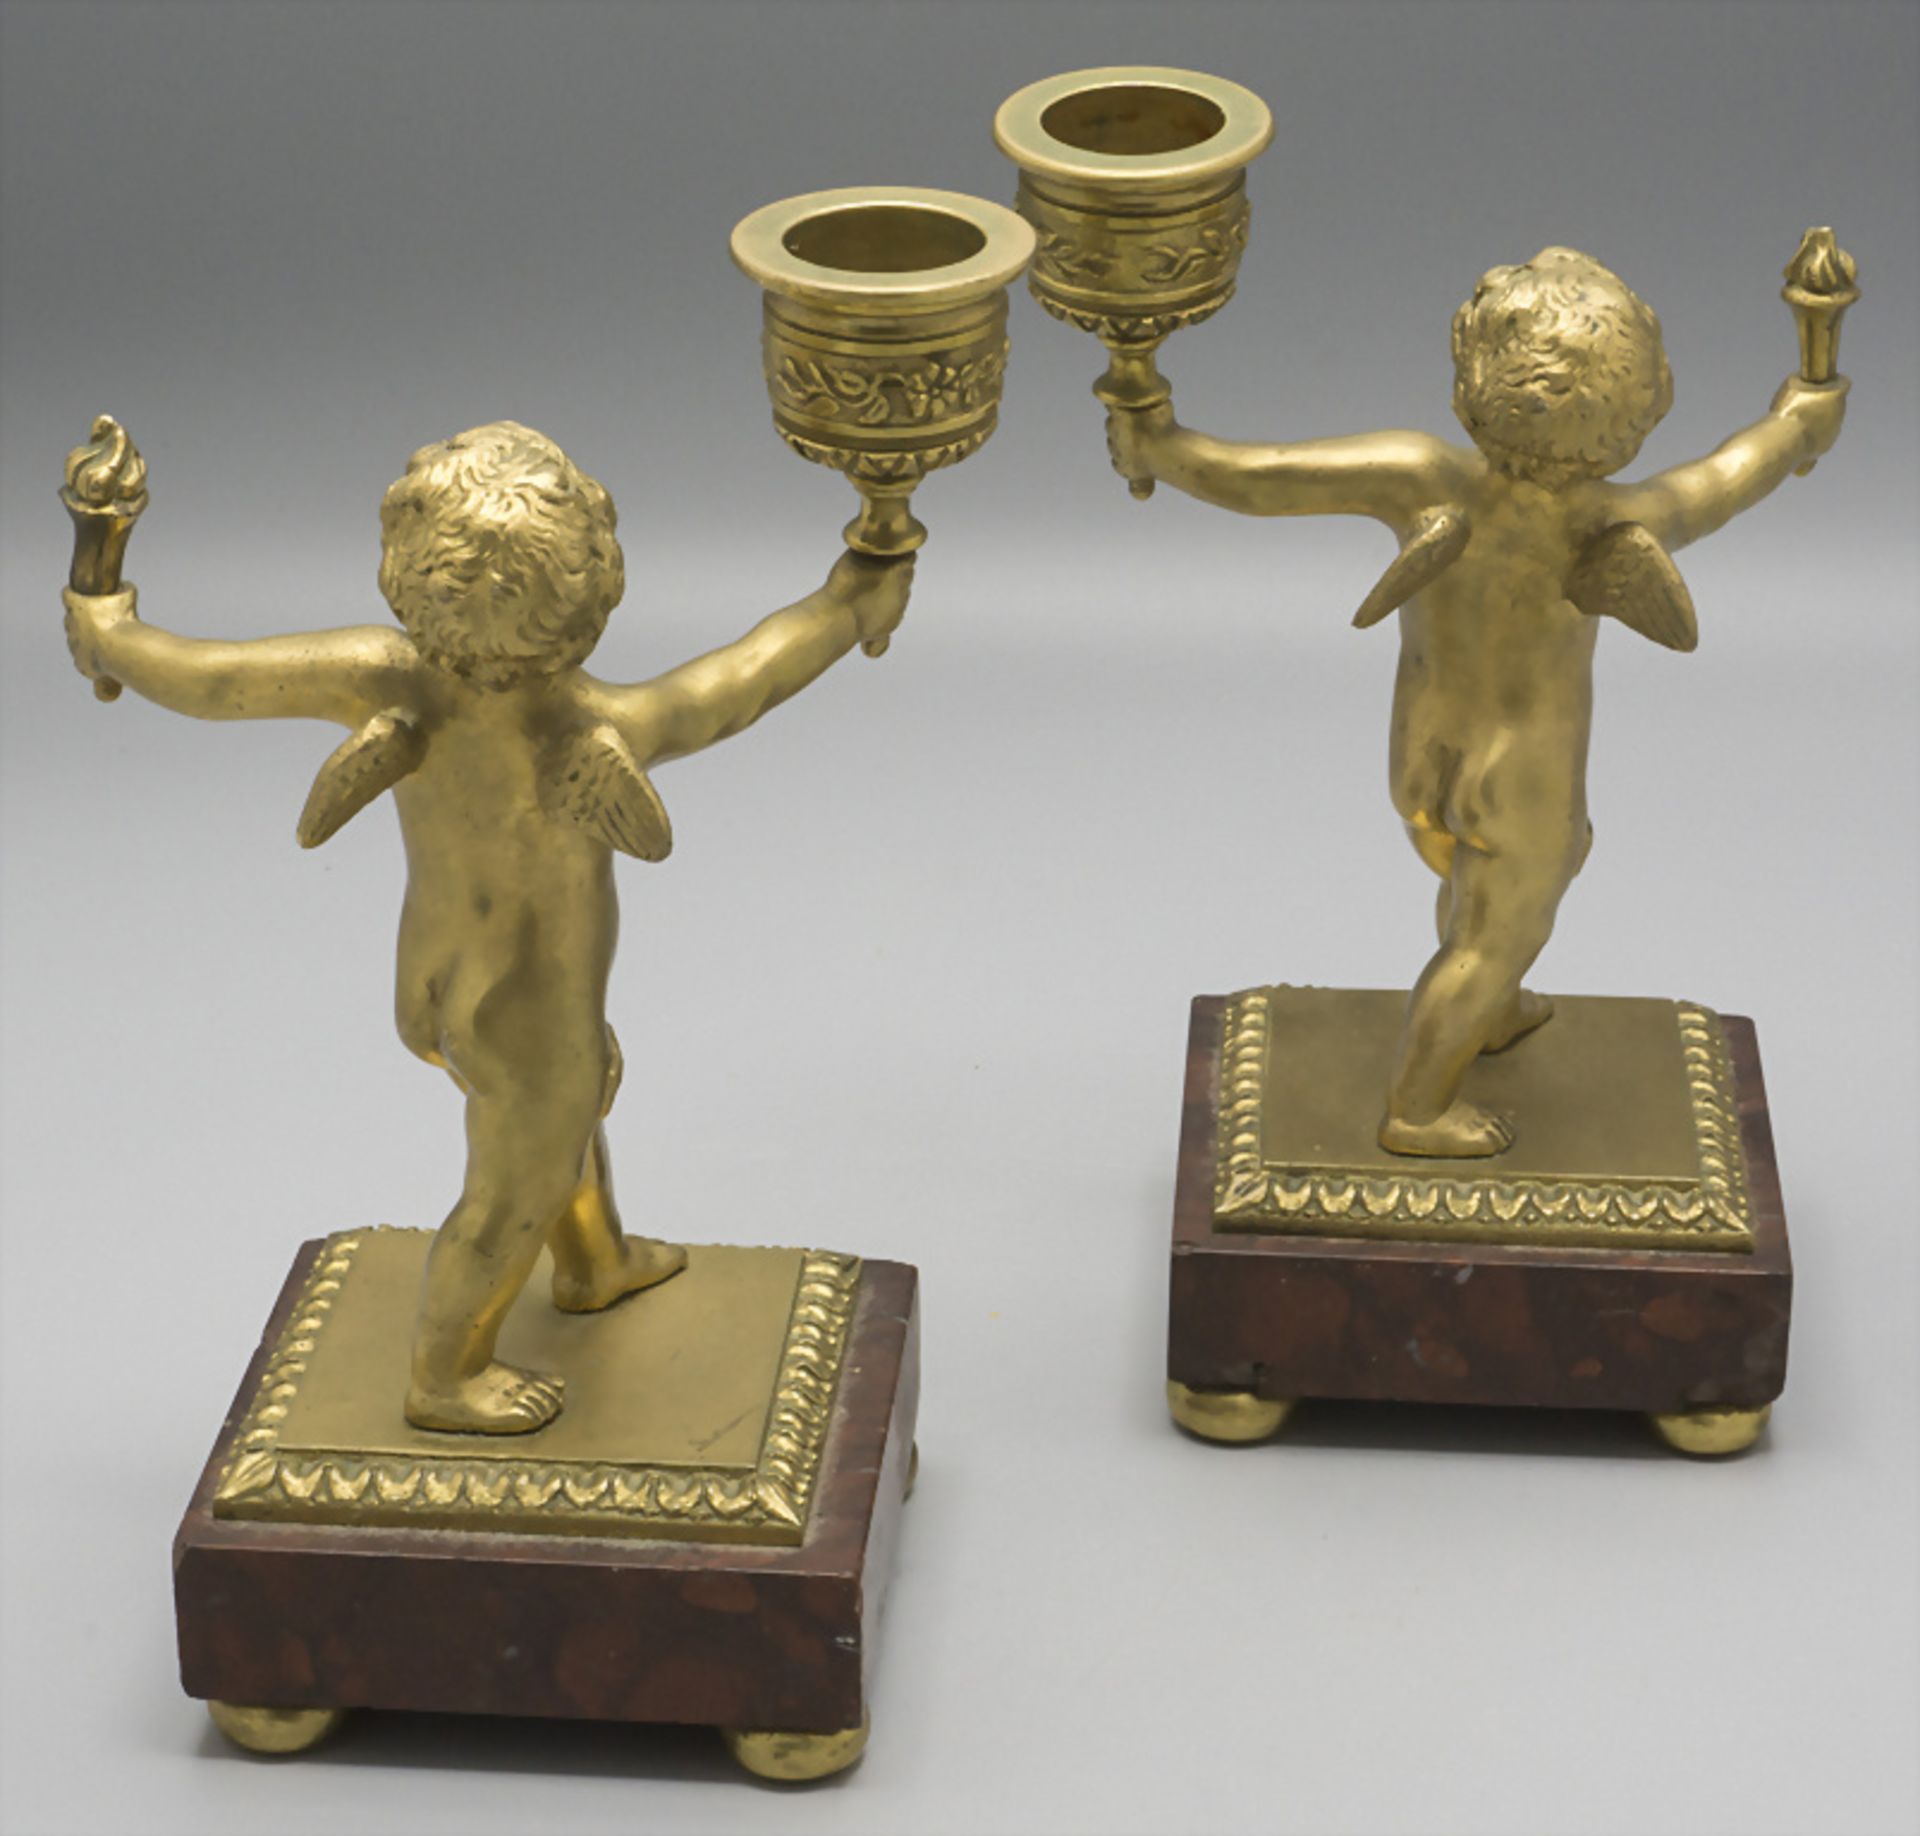 Paar figürliche Bronzeleuchter / A pair of figural candle holders, Frankreich, 19. Jh. - Image 2 of 2